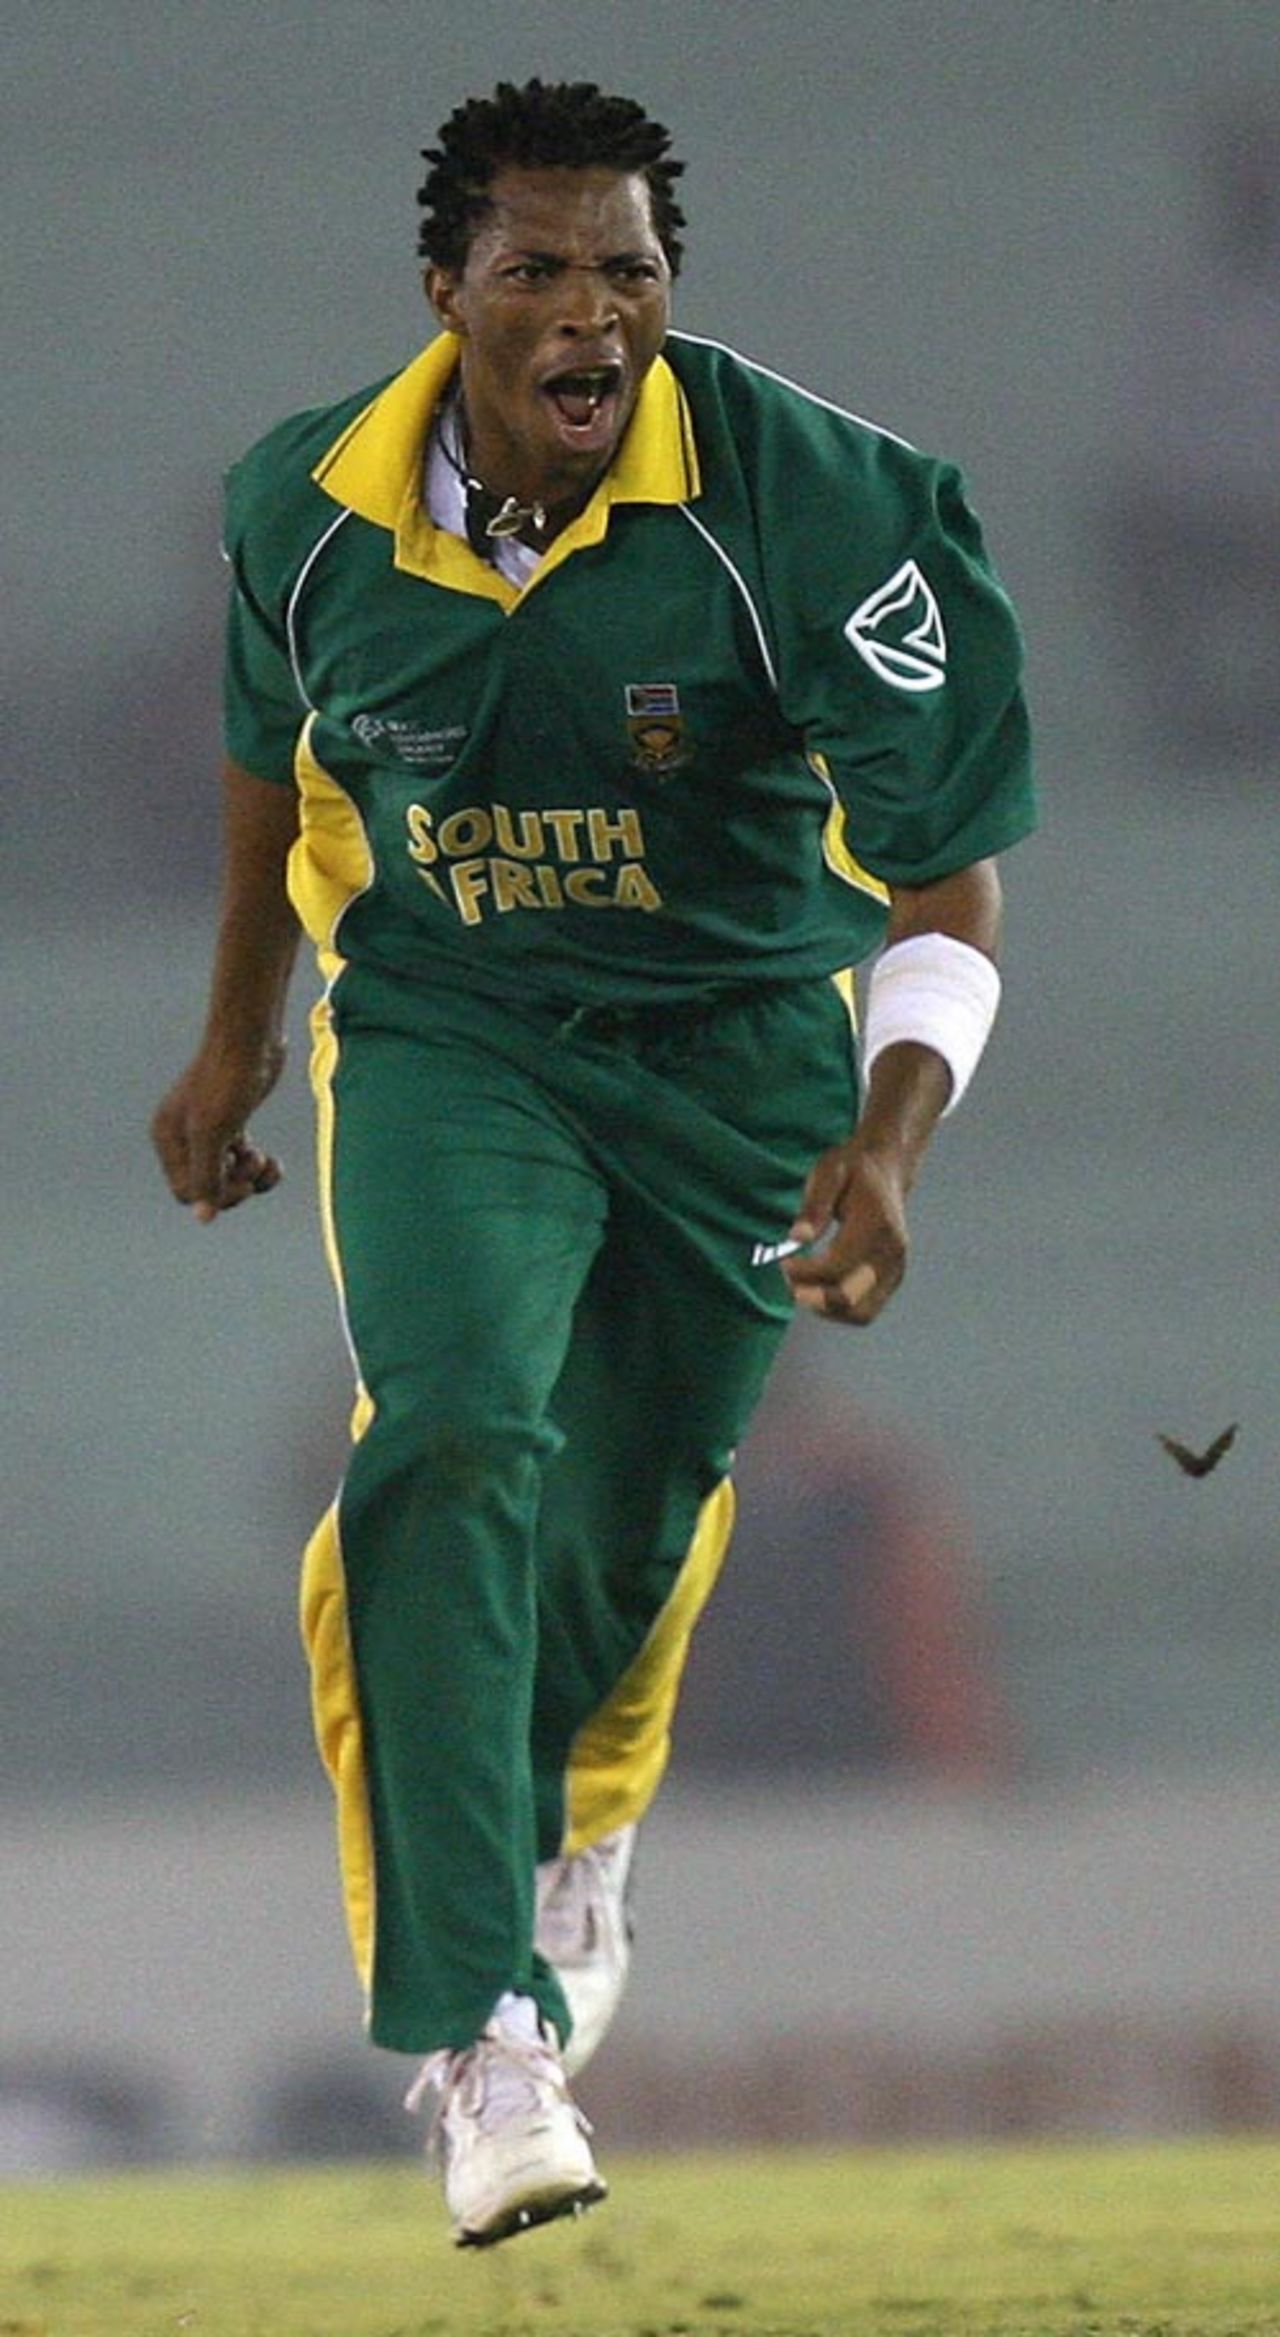 A fired-up Makhaya Ntini on his way to 5 for 21 from six overs, Pakistan v South Africa, Champions Trophy, October 27, 2006